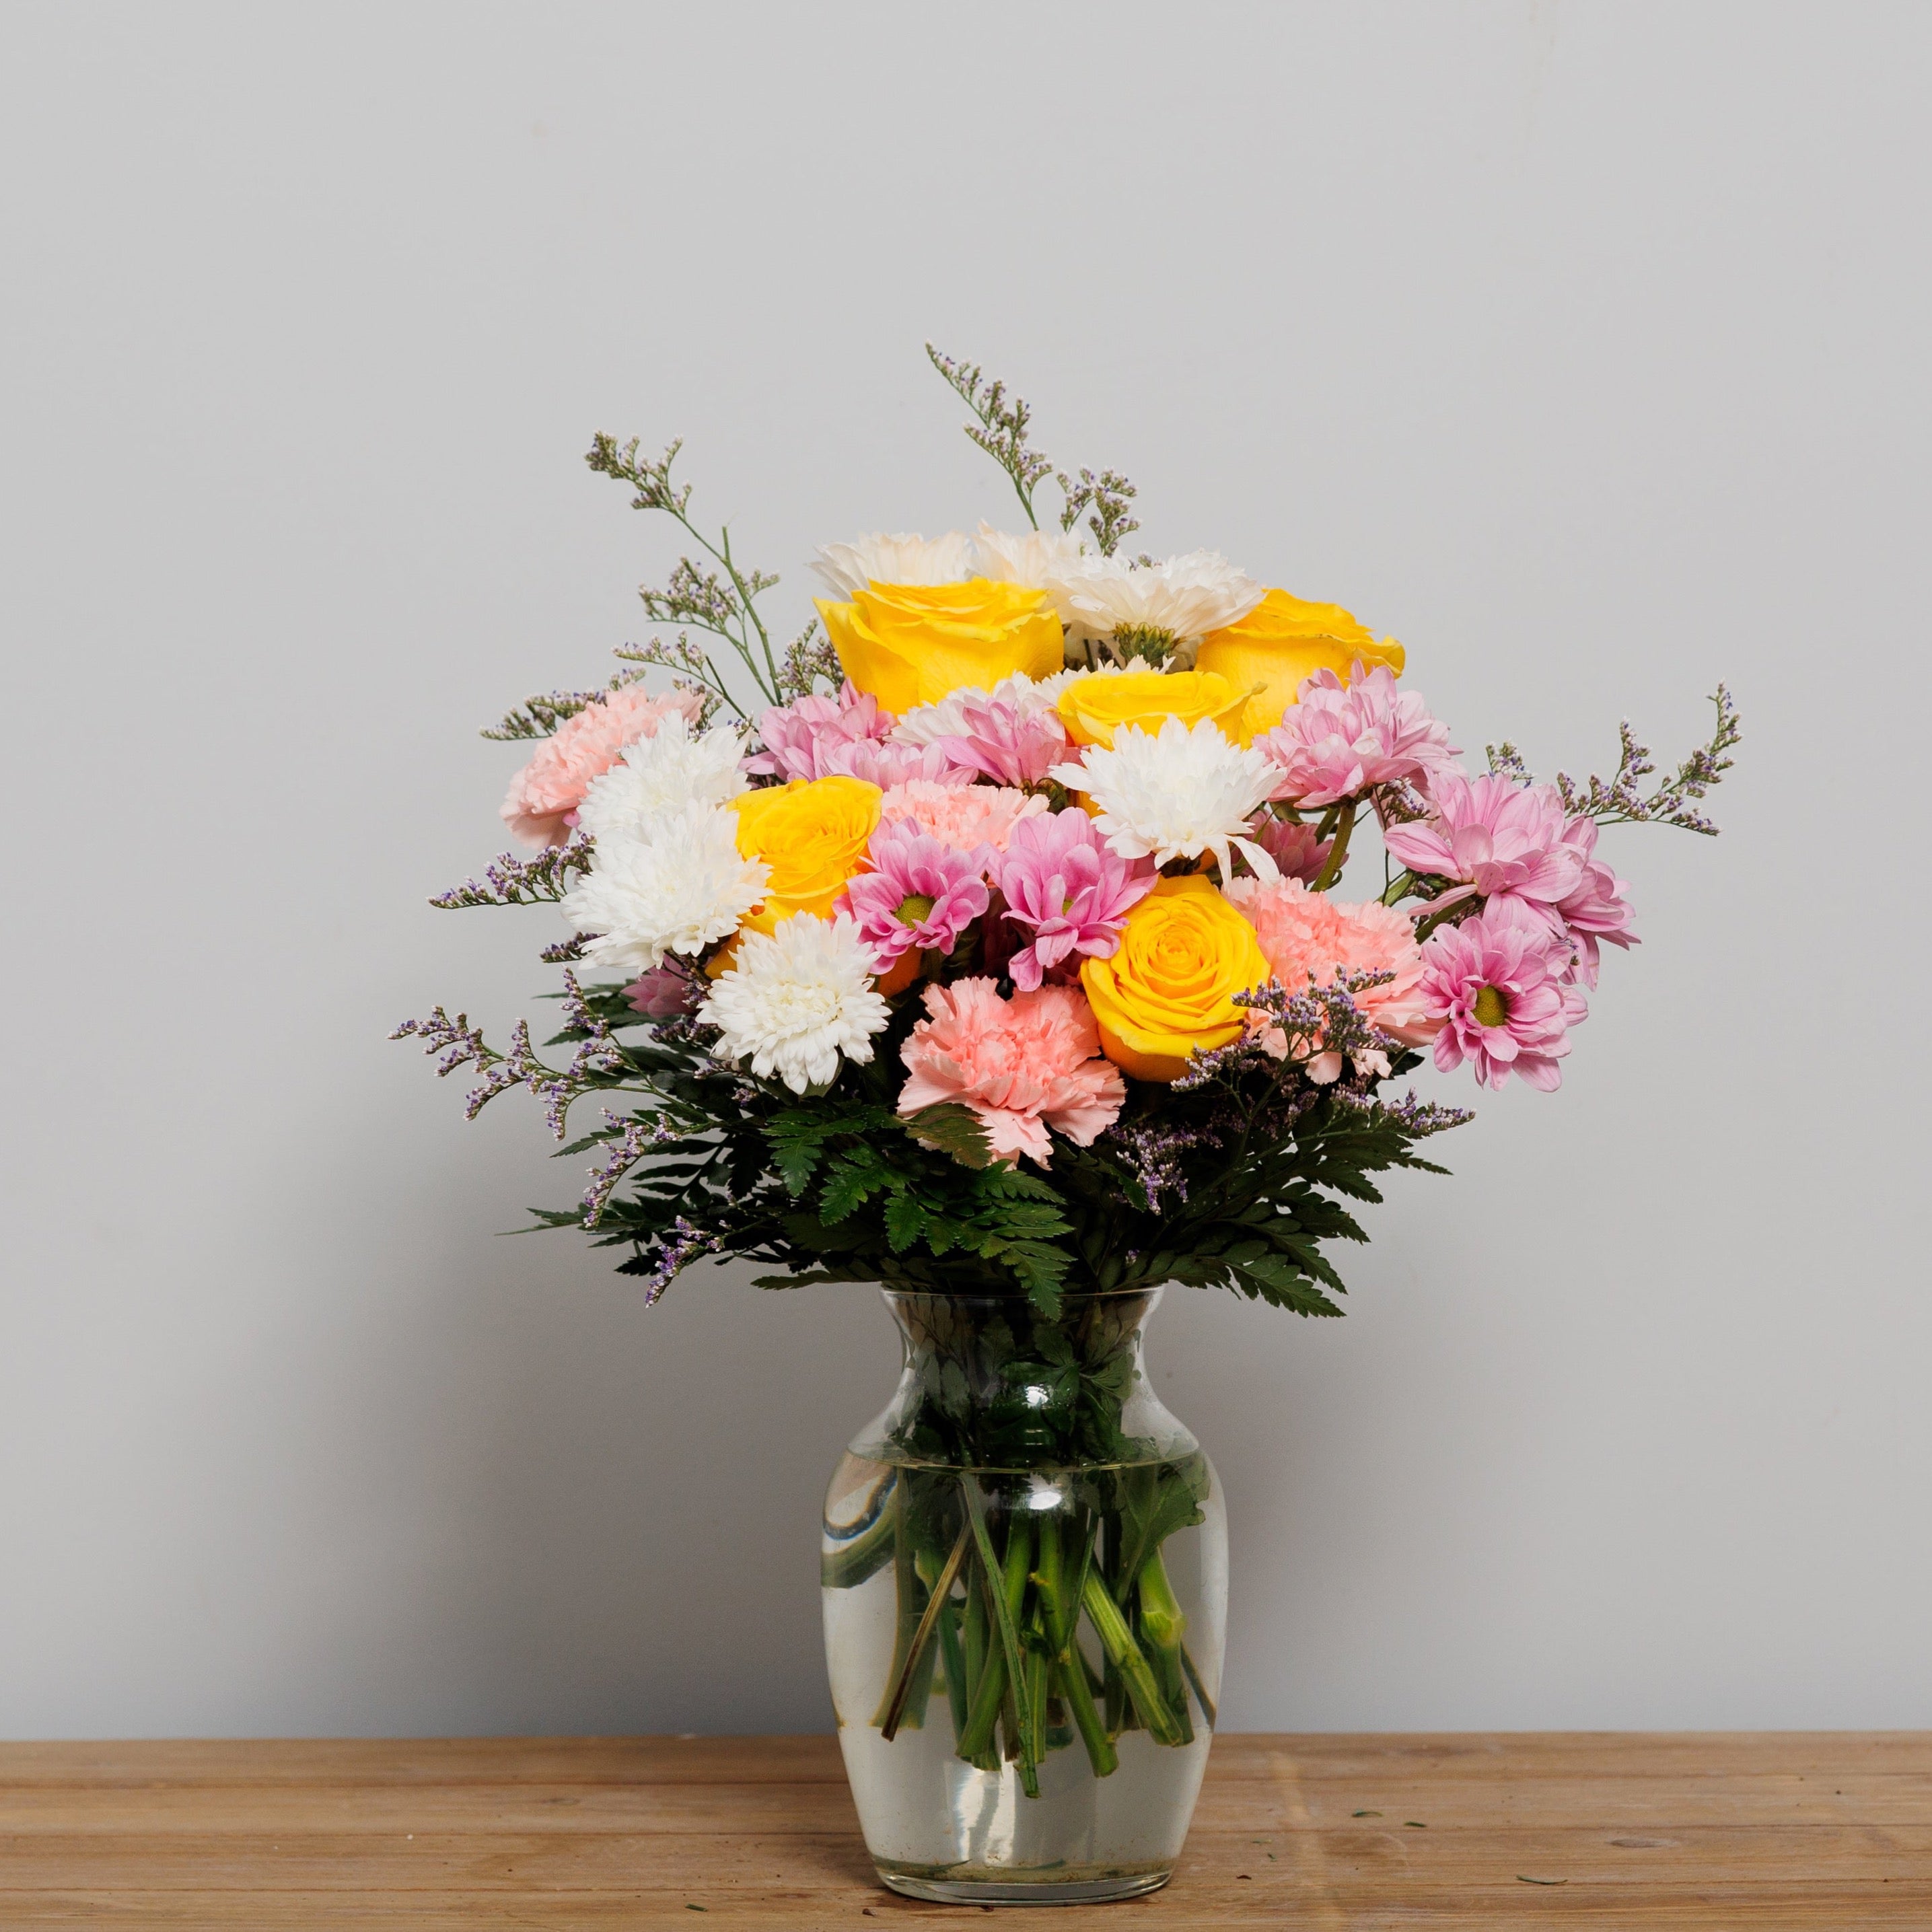 A pastel vase arrangement with yellow roses, white mums, pink carnations and lavender daisies.